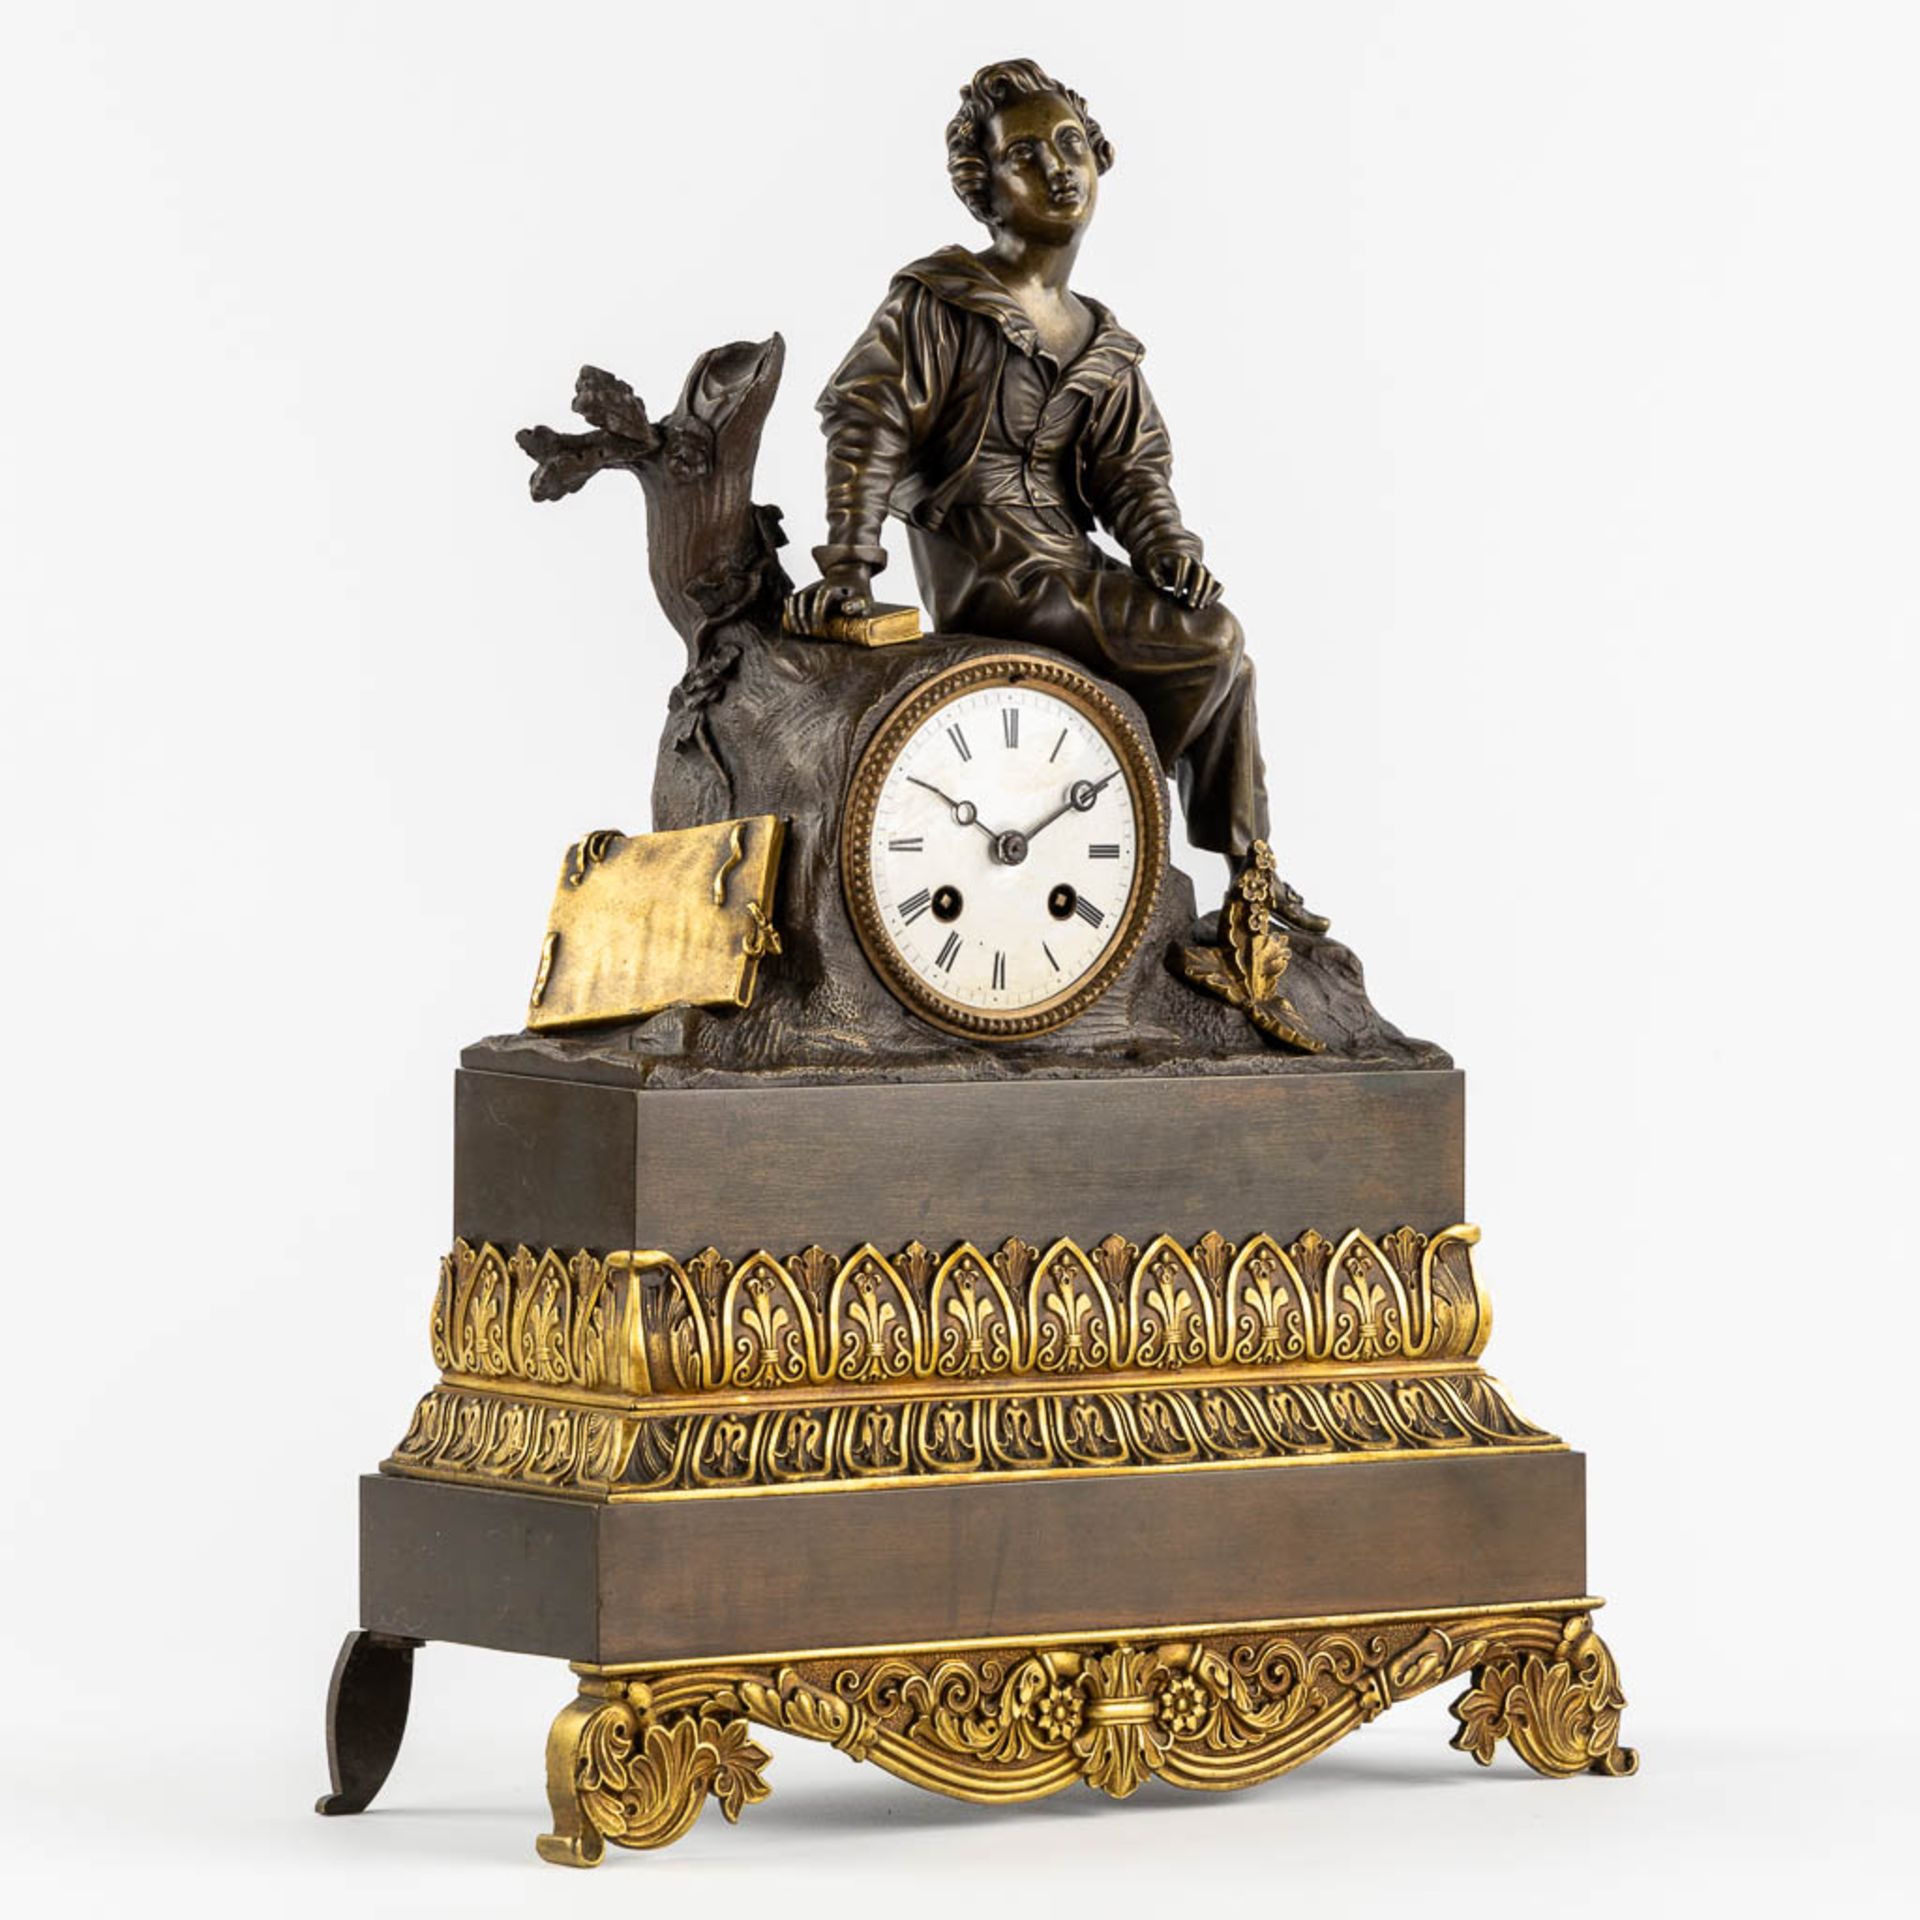 A mantle clock, gilt and patinated bronze, Empire style. 19th C. (L:13 x W:34 x H:46 cm) - Image 3 of 9